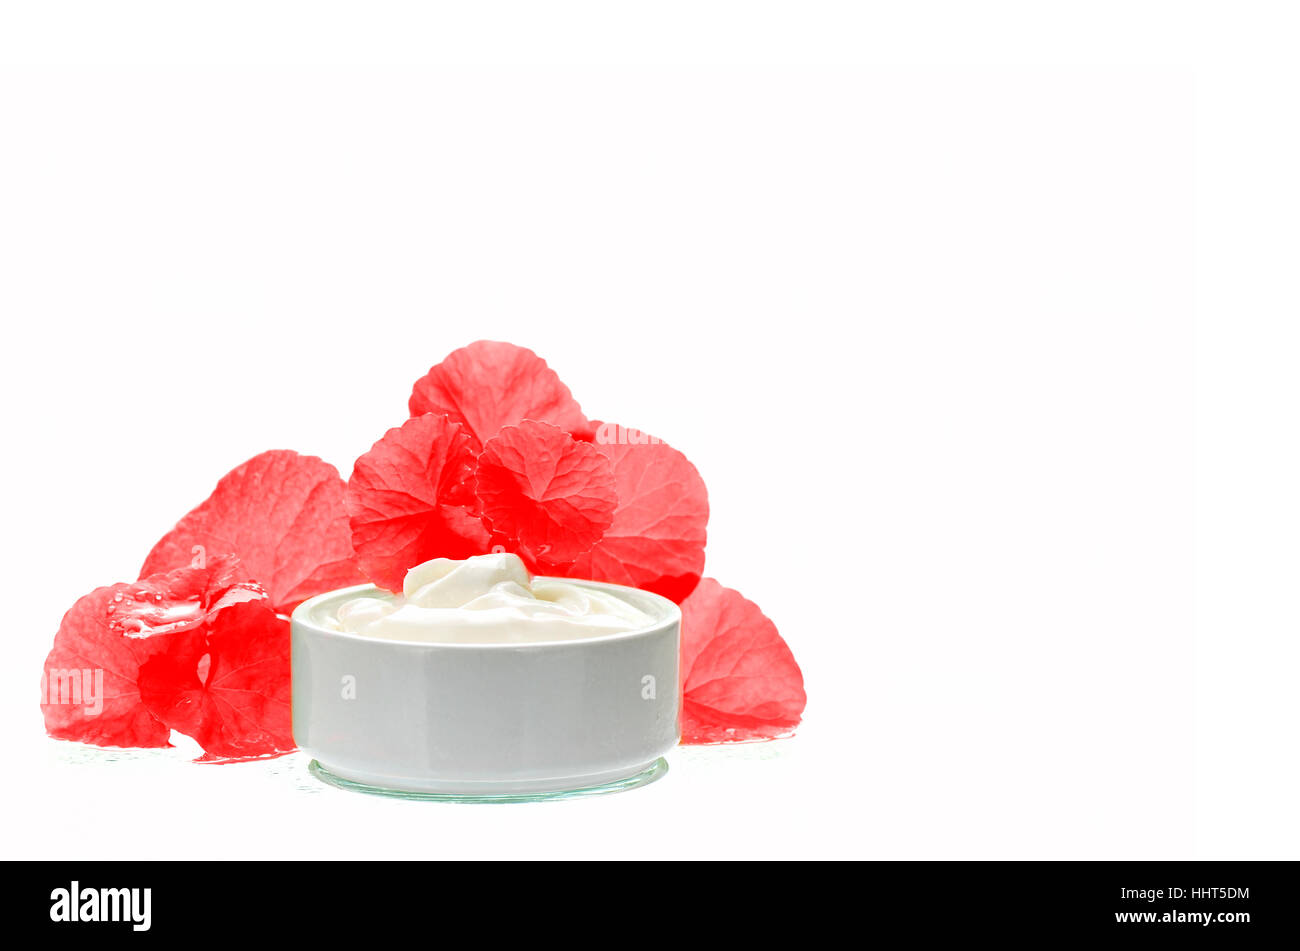 Centella asiatica leaves and skincare product in red and white tone. Indian pennywort (Centella asiatica (L.) Urban.) anti-aging skin care product. Stock Photo